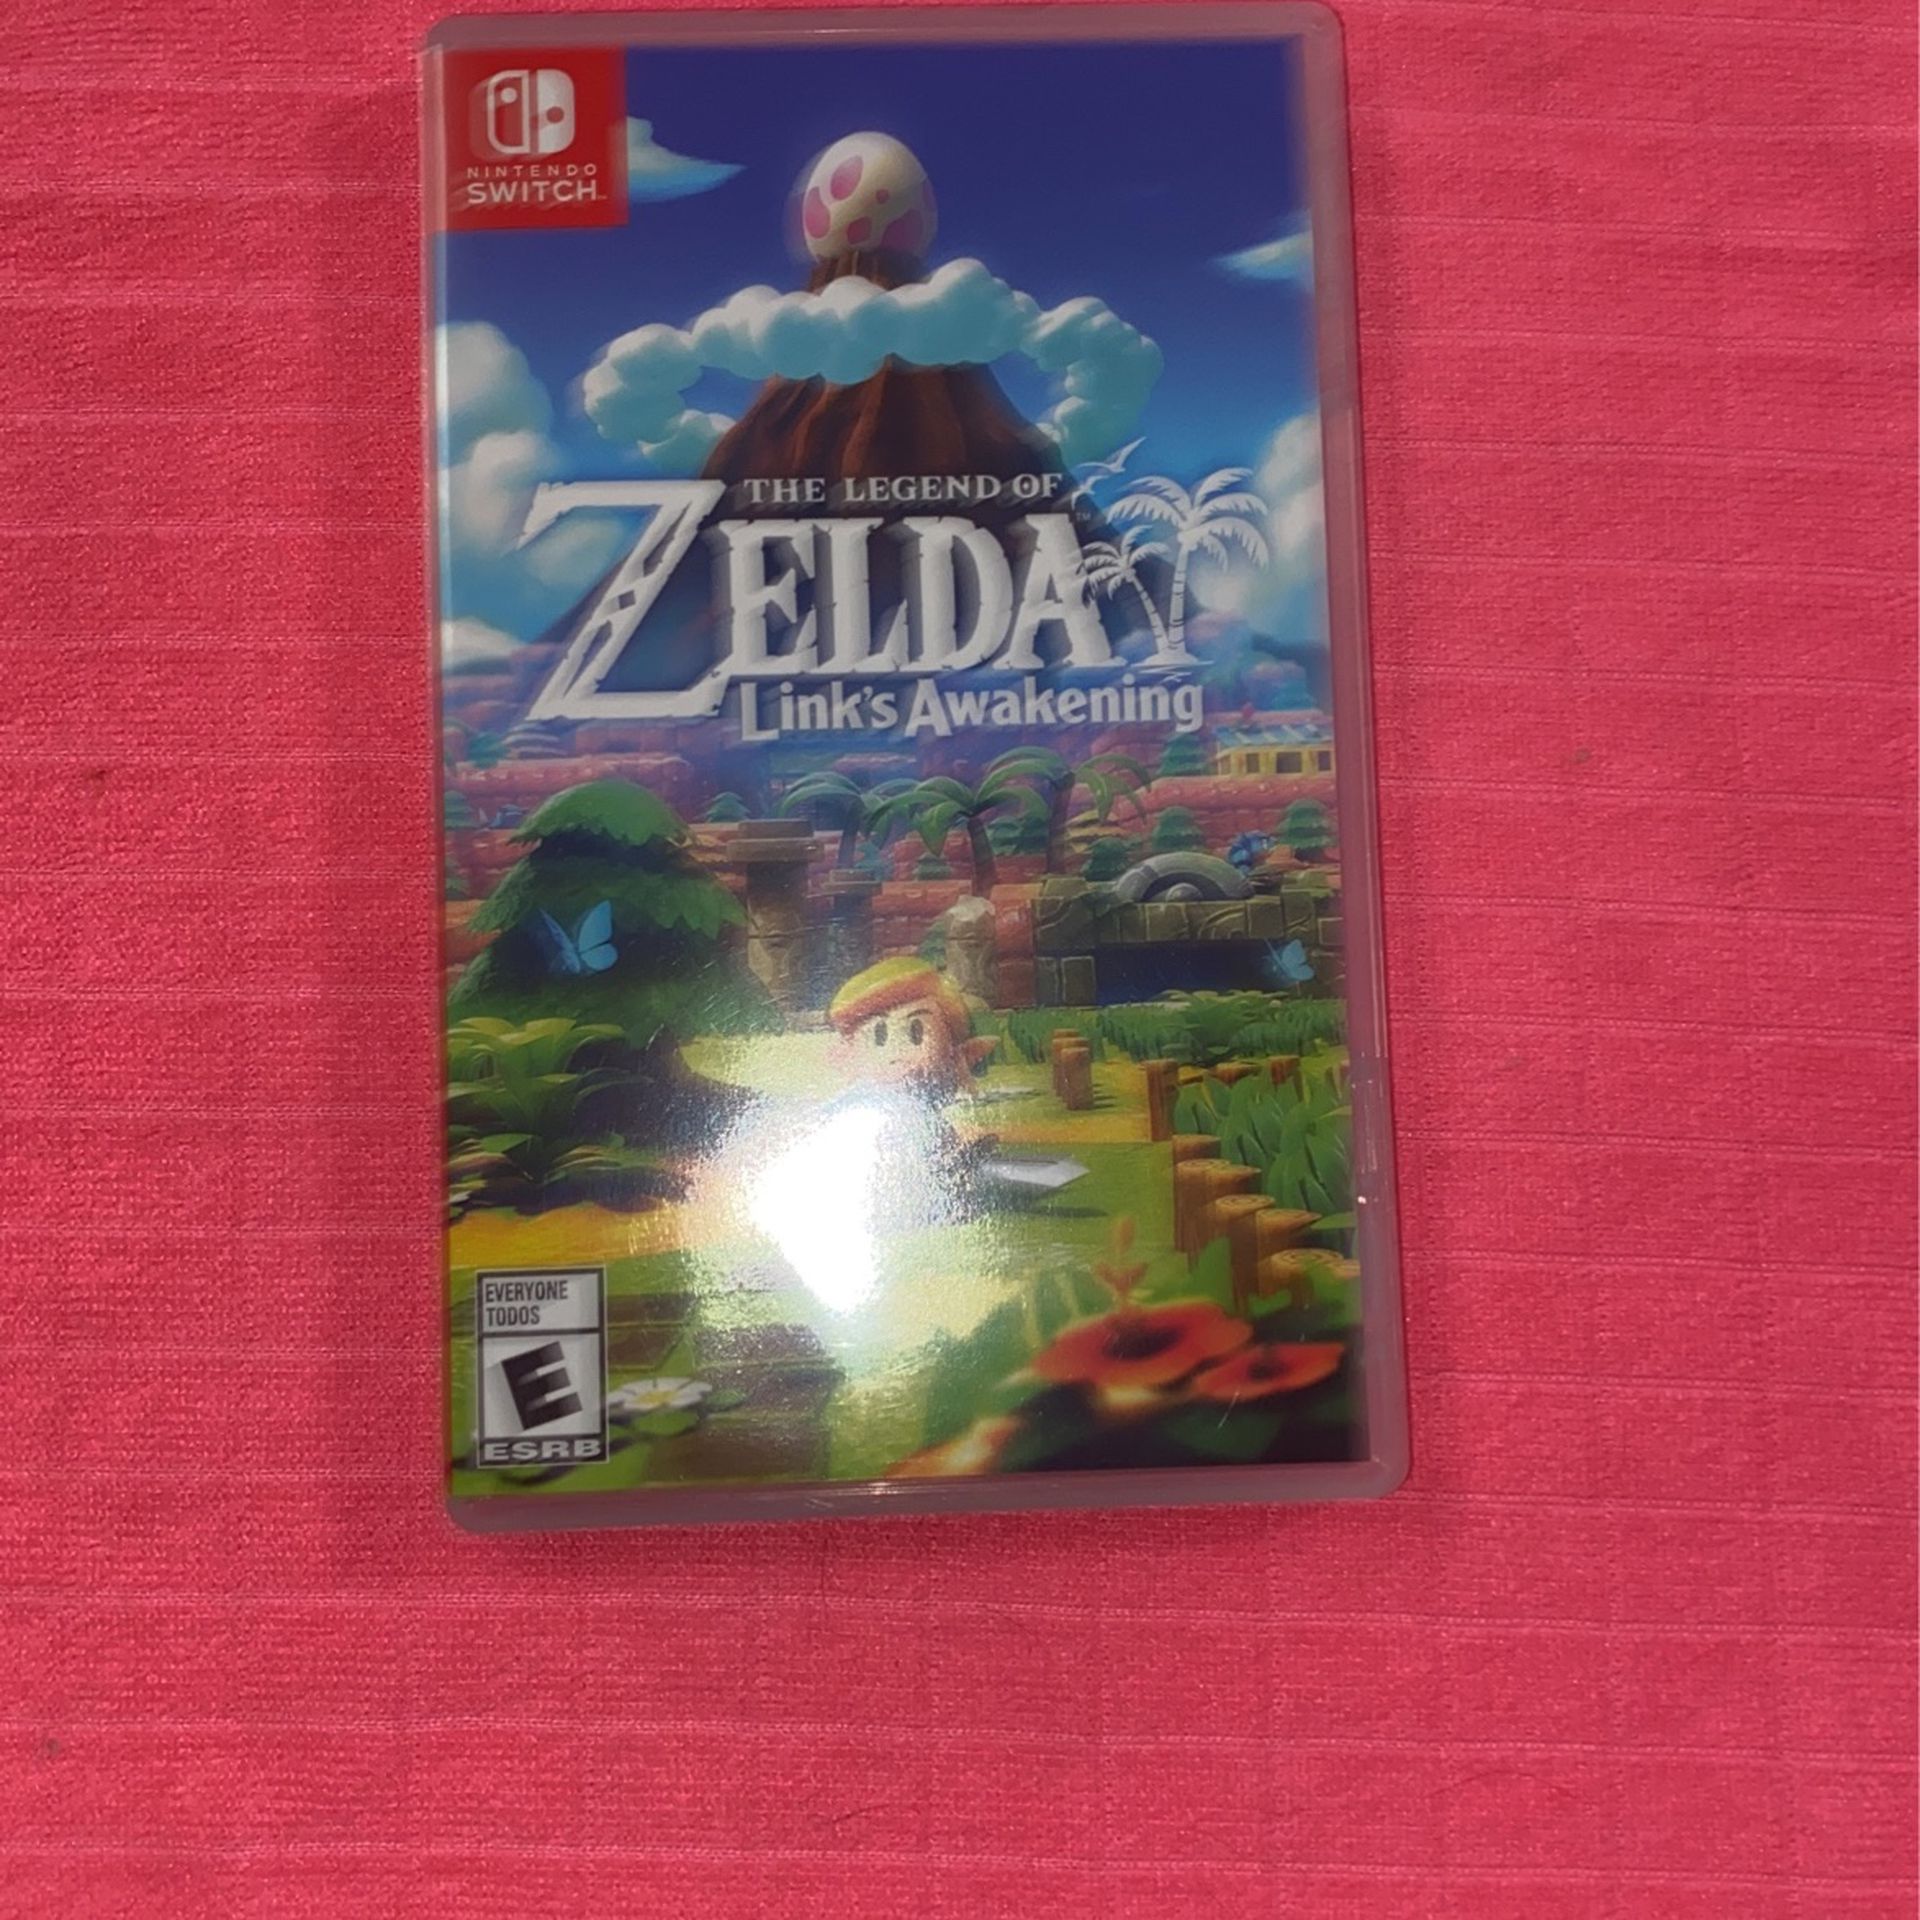 The Legend Of Zelda Link’s Awakening For The Nintendo Switch With The Case And Game